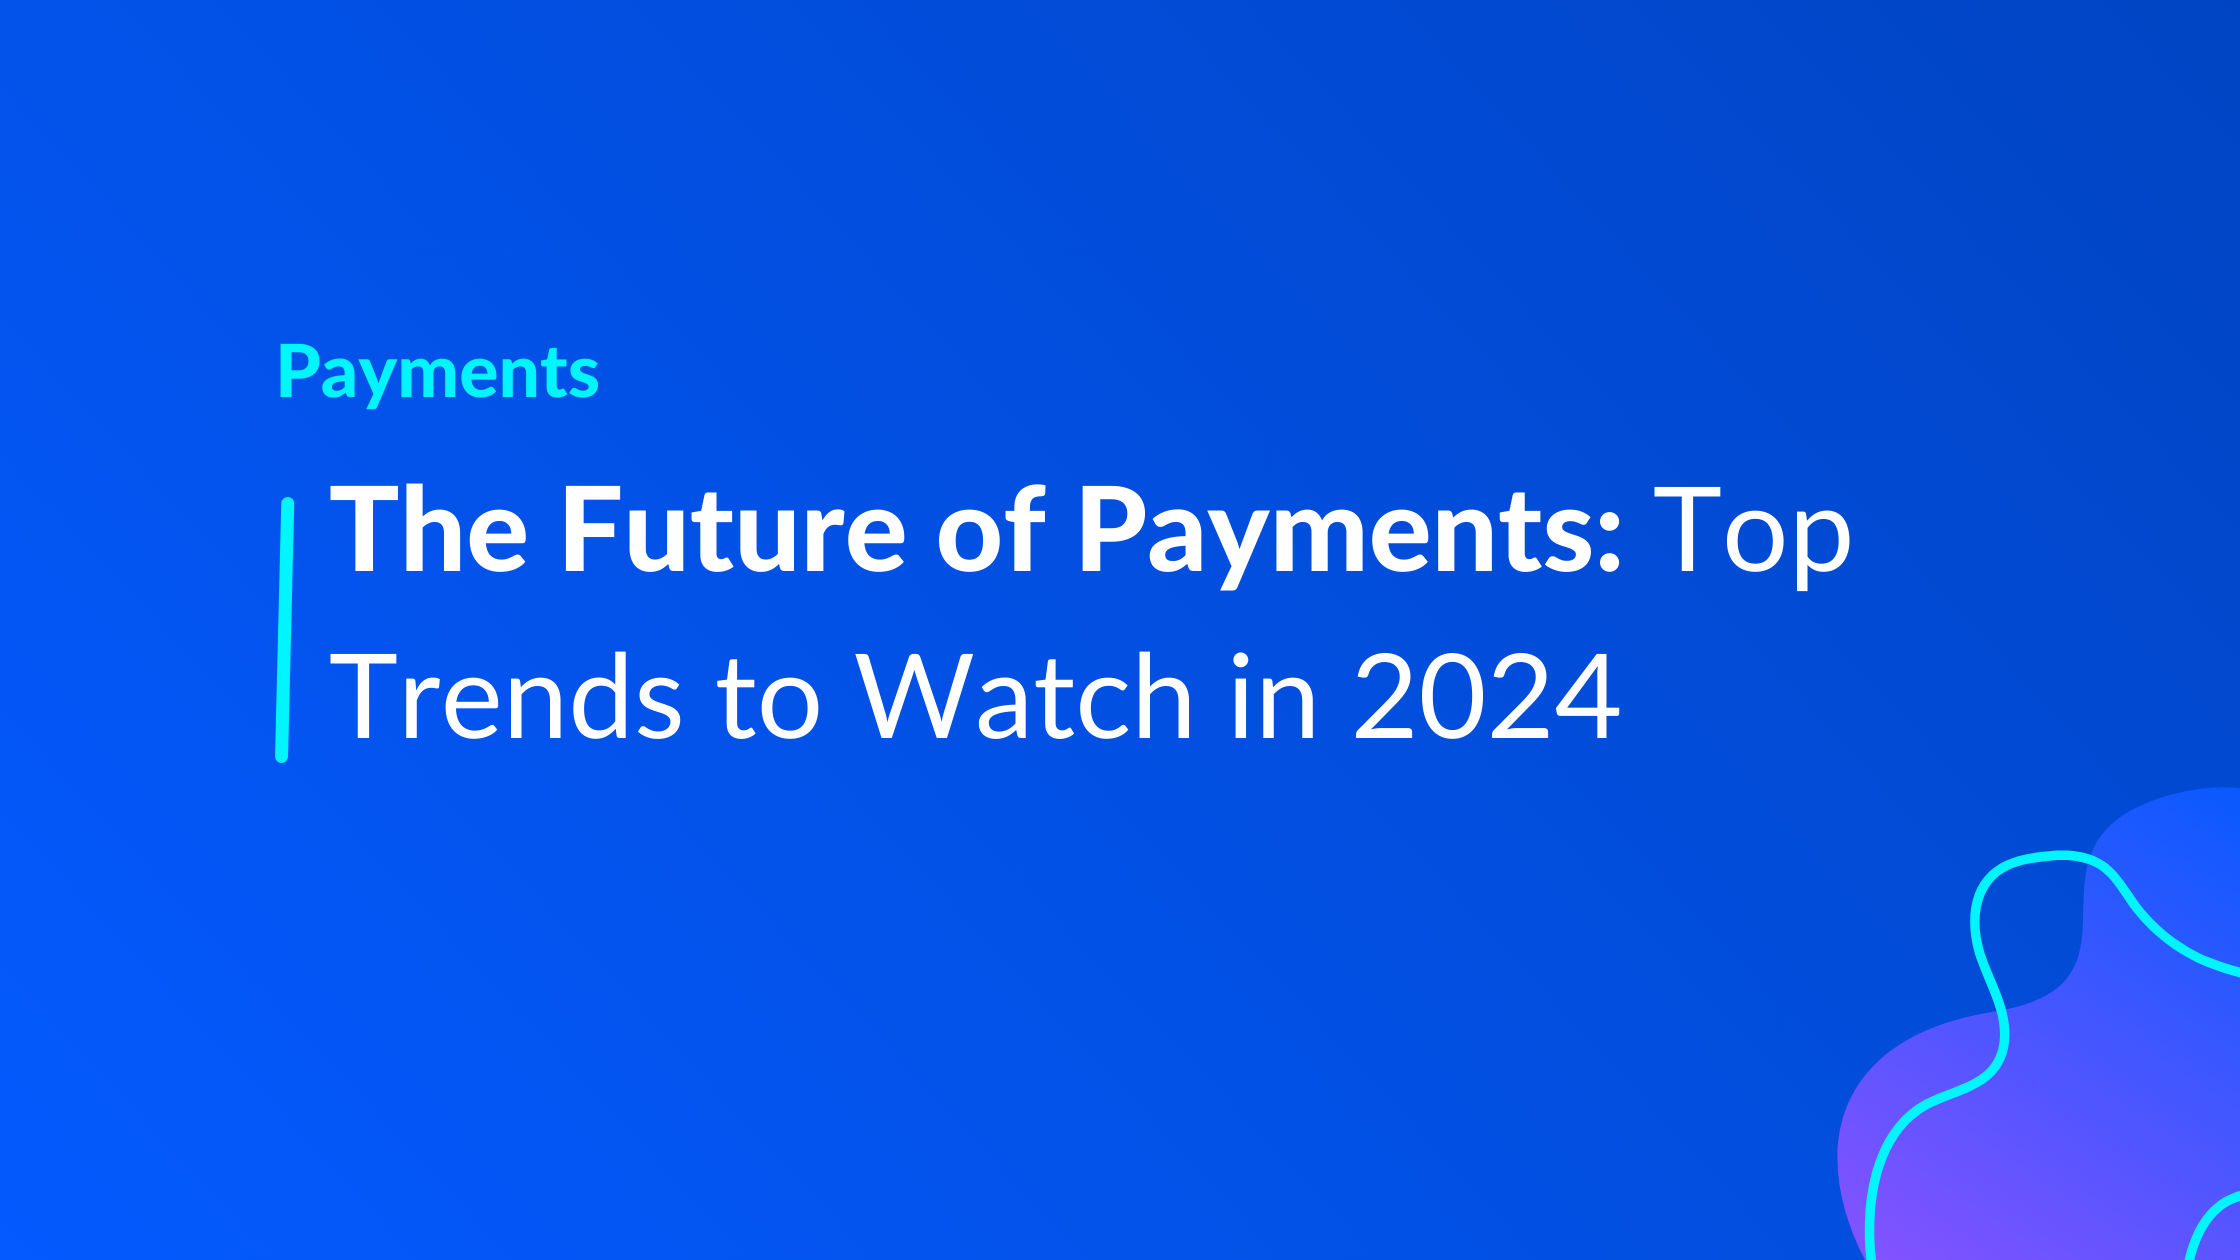 The Future of Payments Top Trends to Watch in 2024